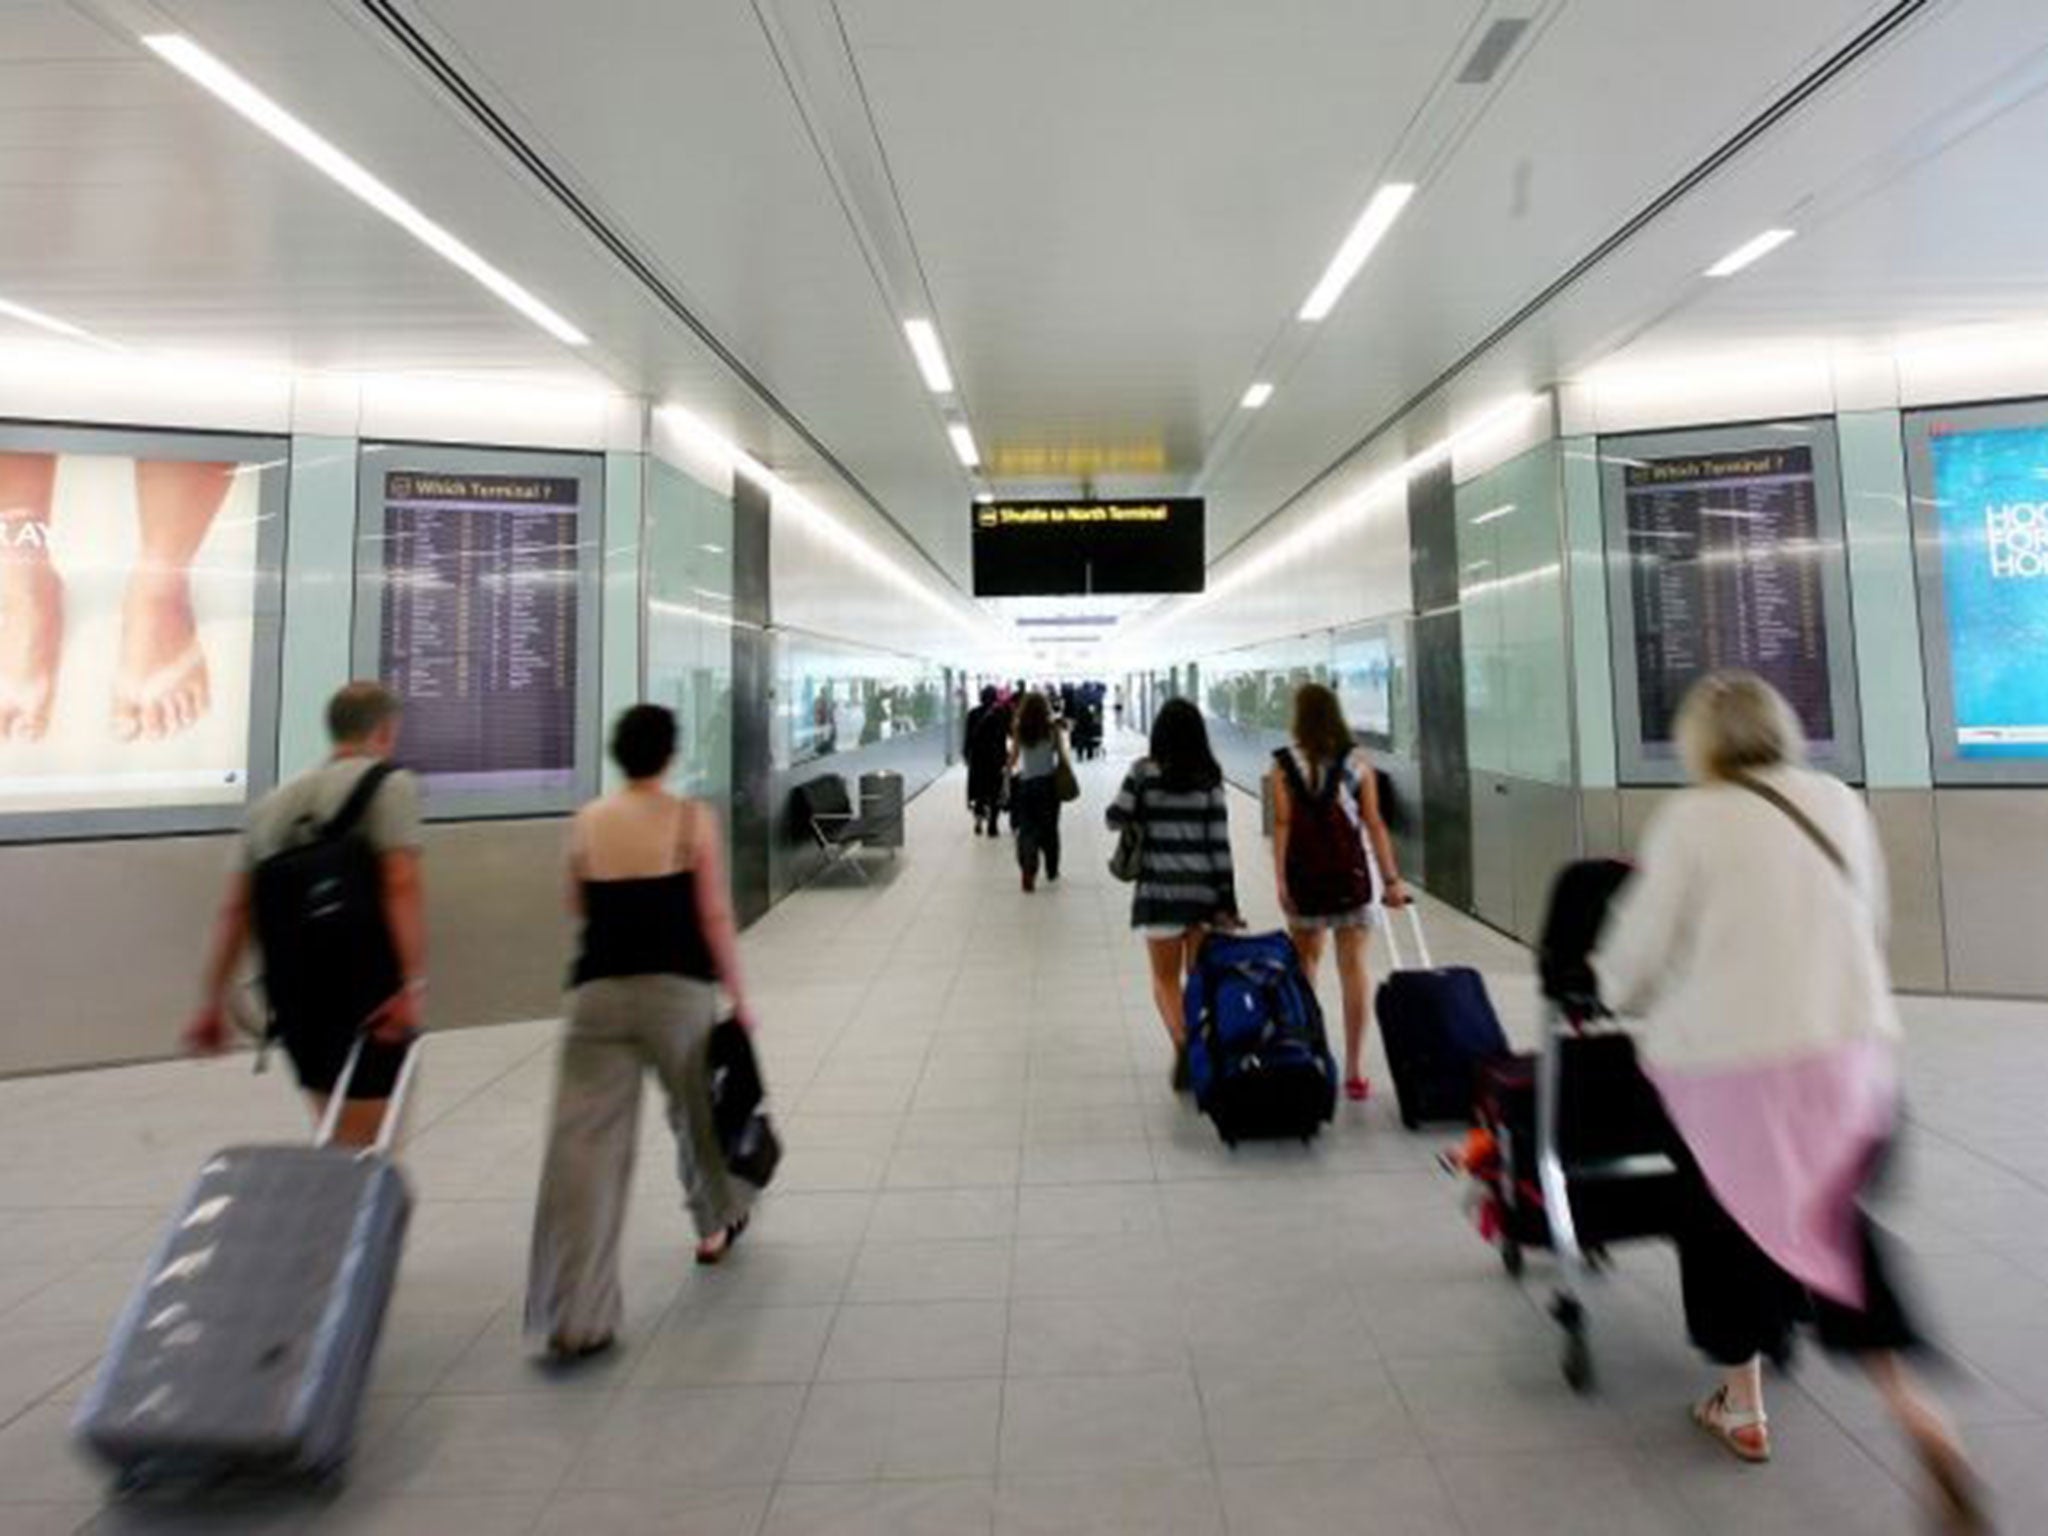 Baggage reclaim staff report that it is business as usual with no delays so far